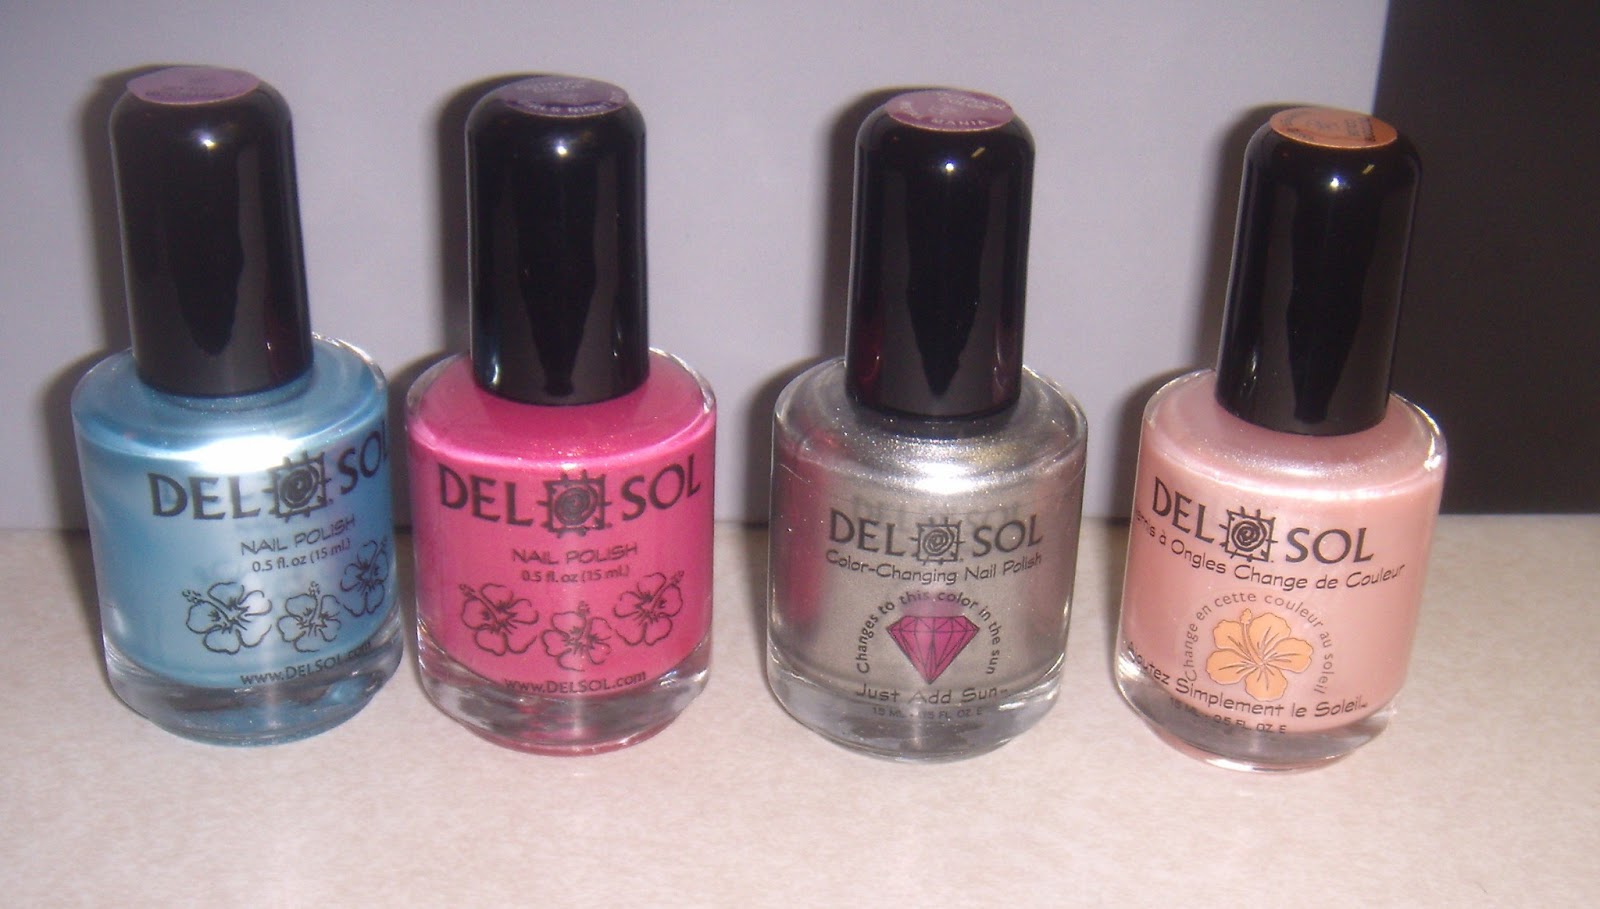 1. Color Changing Nail Polish - Del Sol - wide 5